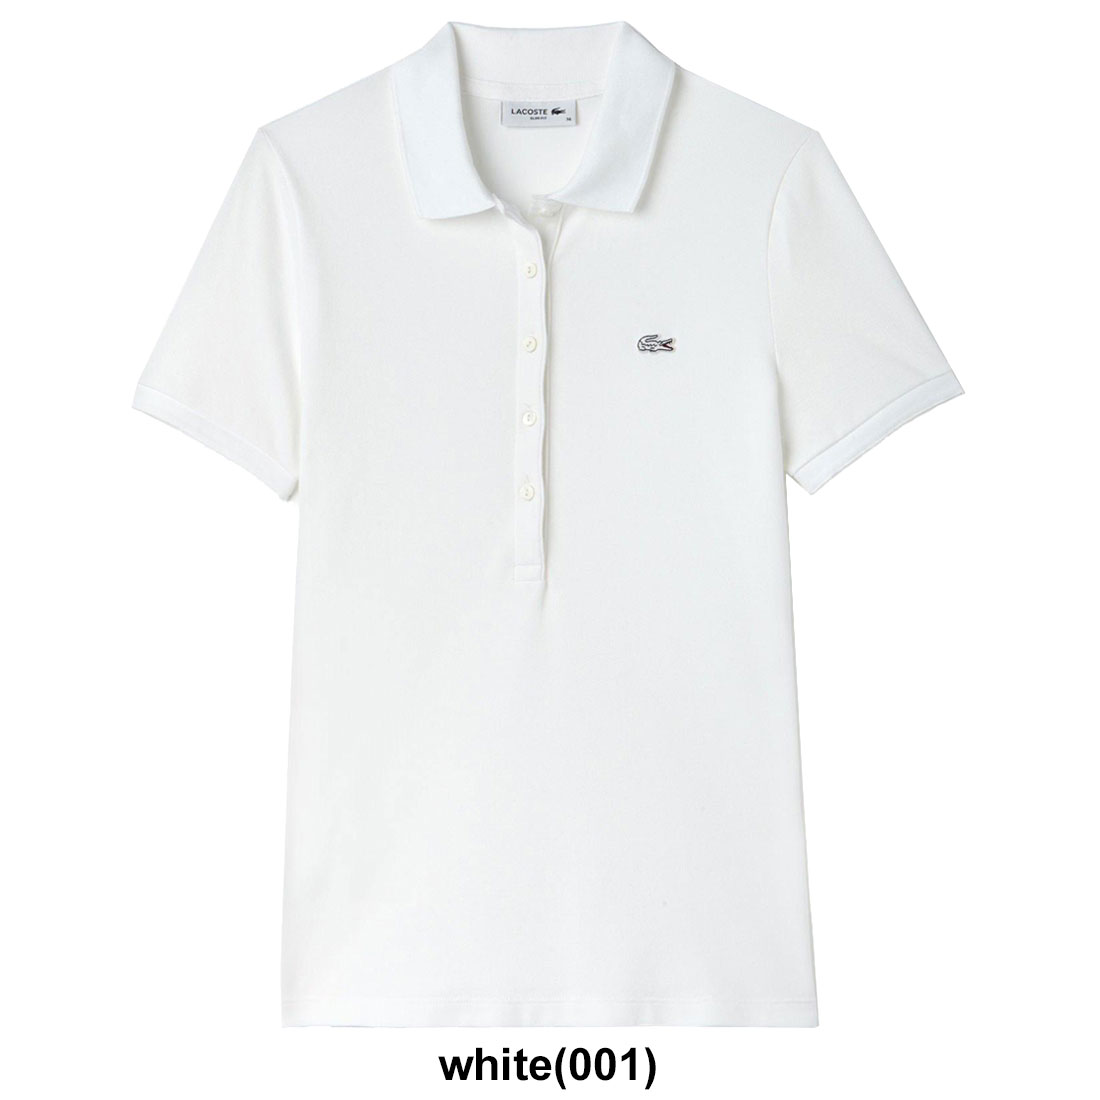 womens lacoste top